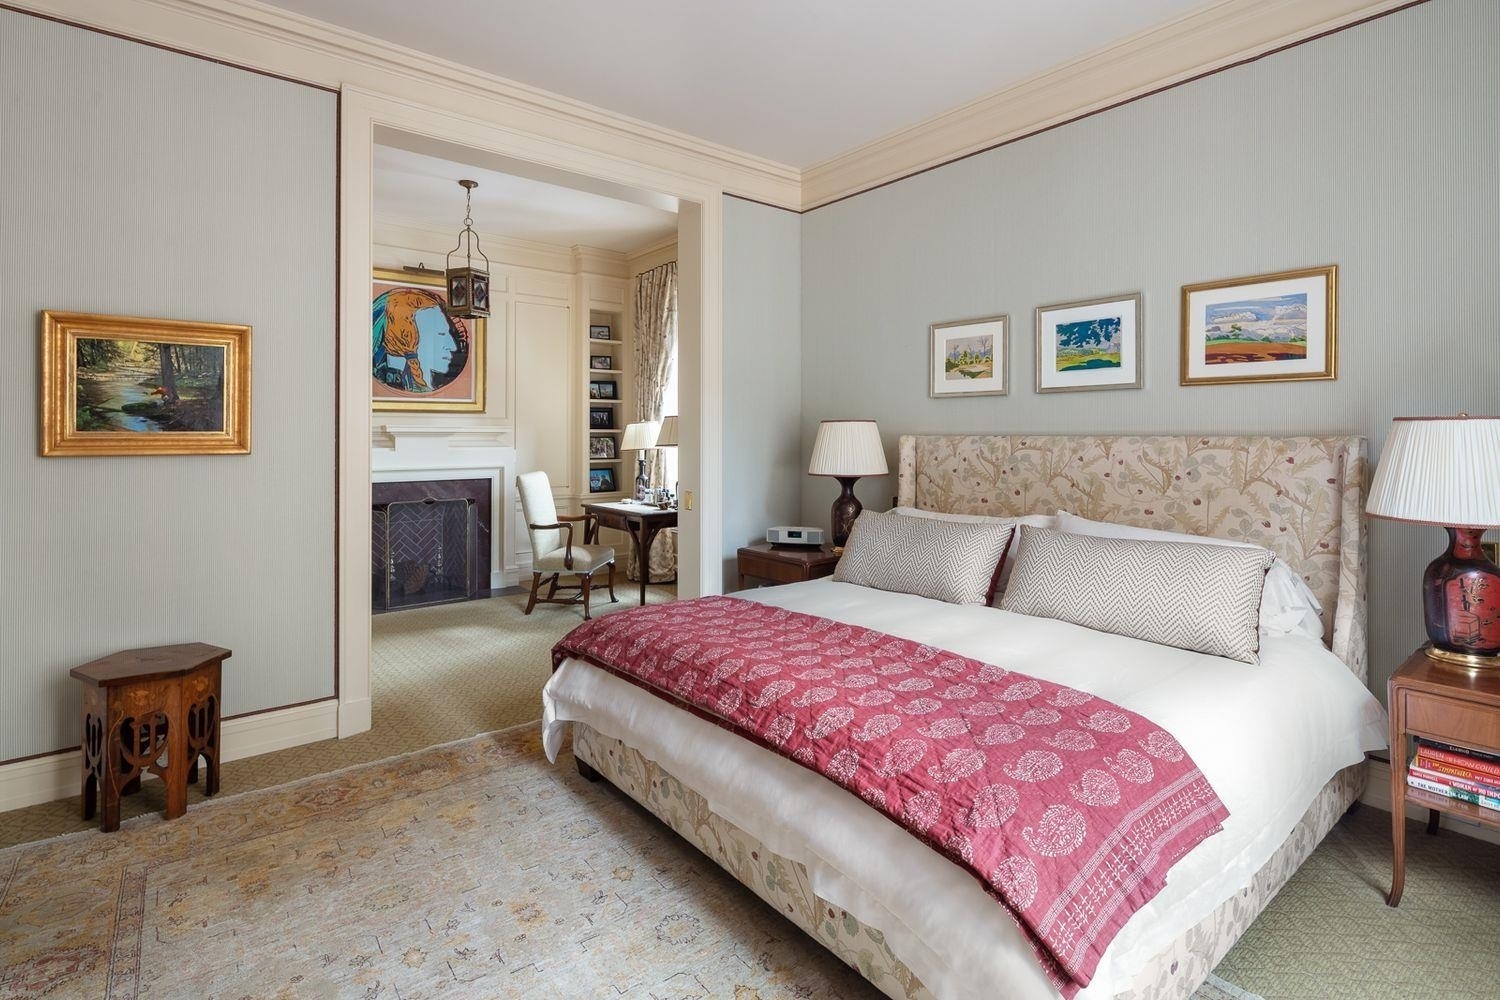 11. Co-op Properties for Sale at Harperley Hall, 41 CENTRAL PARK W, 11A Lincoln Square, New York, NY 10023